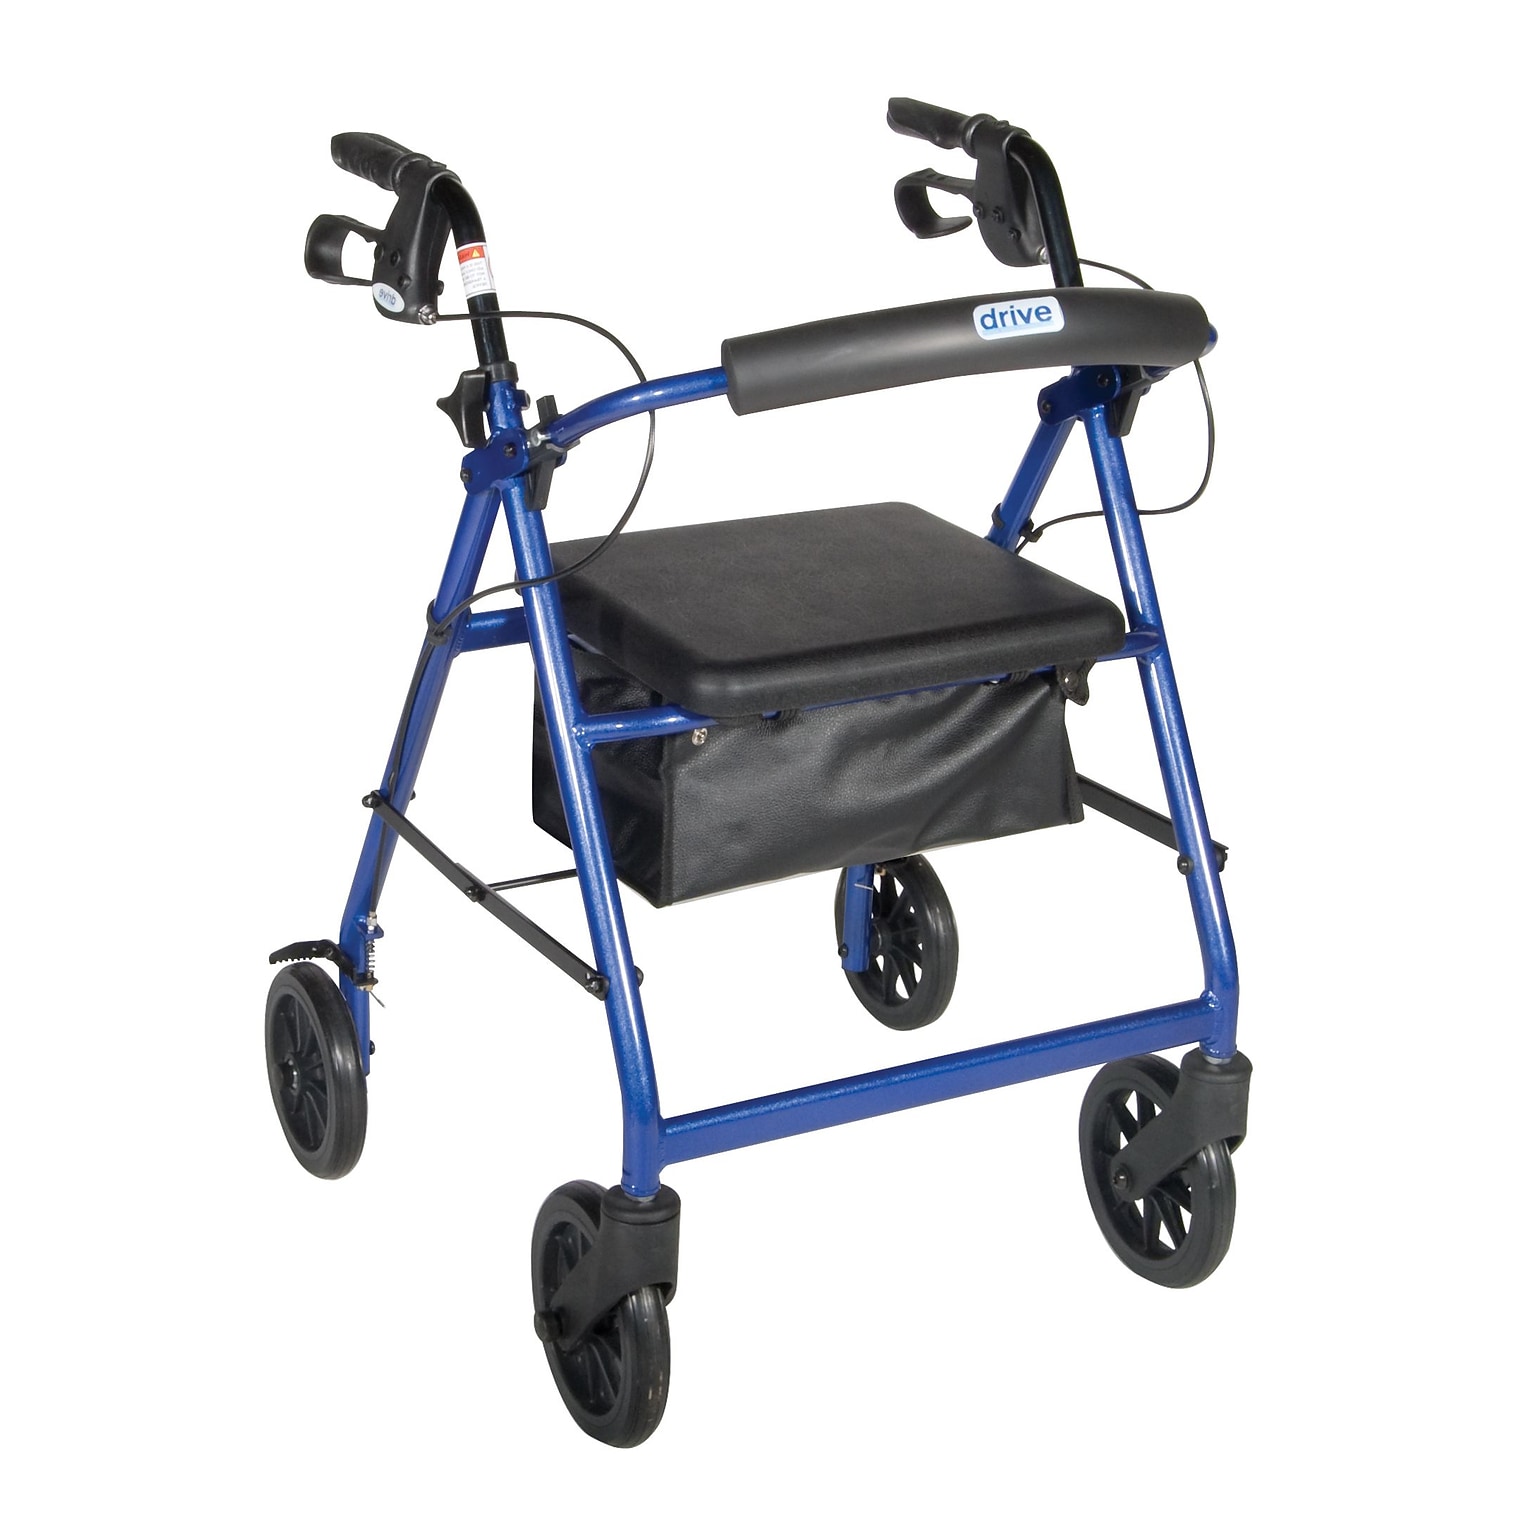 Drive Medical Aluminum Rollator Rolling Walker with Fold Up and Removable Back Support and Padded Seat Blue (R728BL)